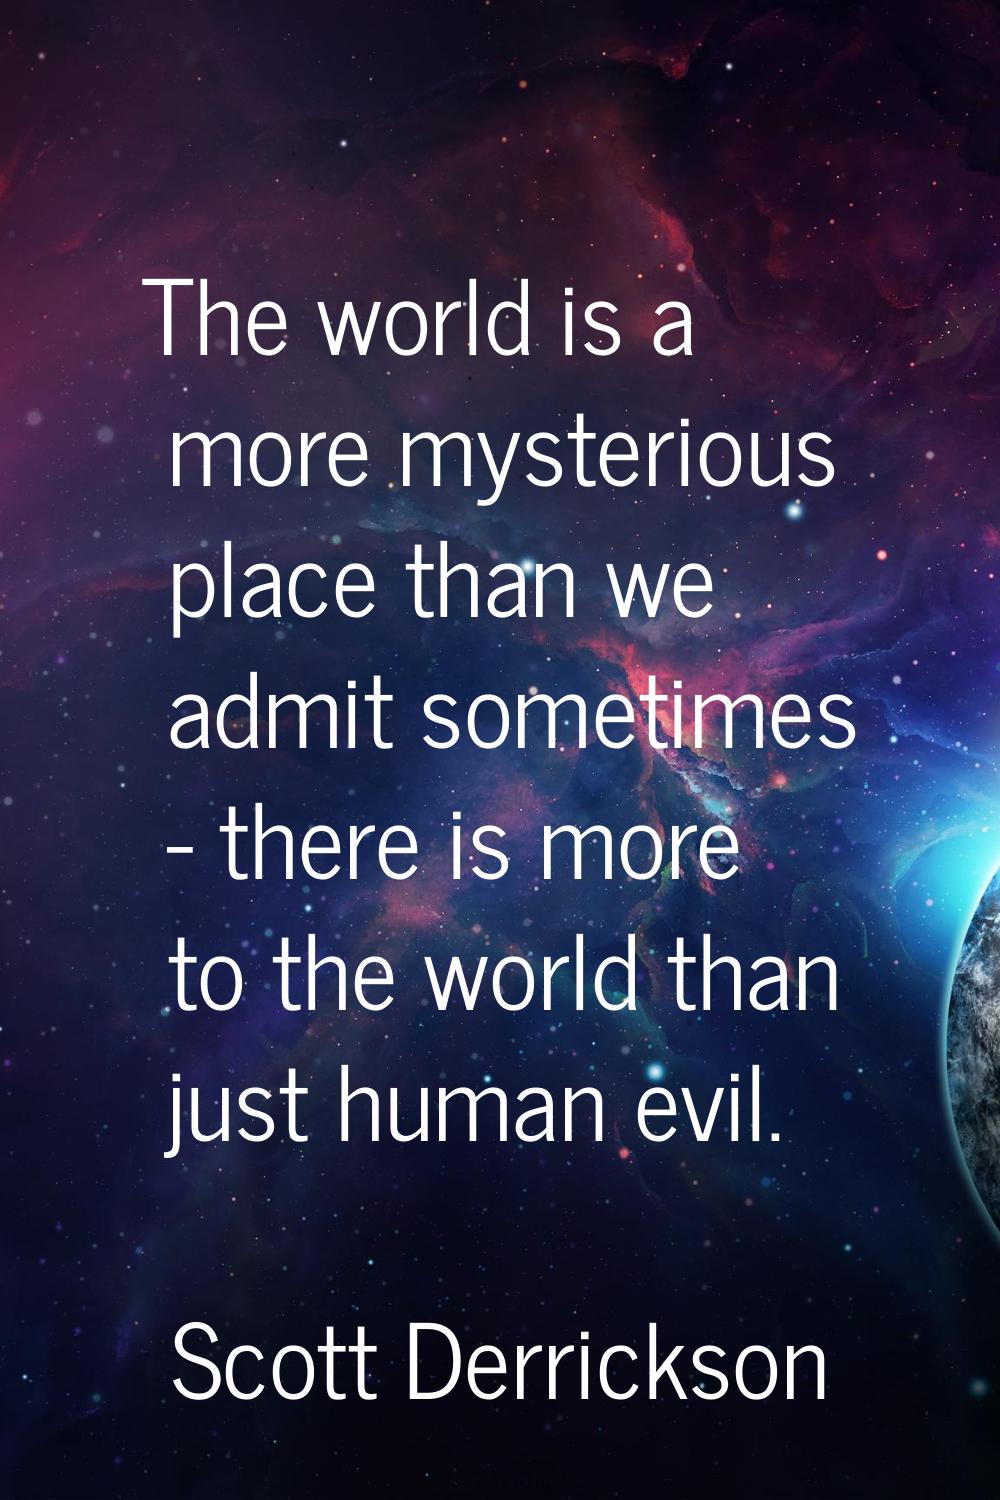 The world is a more mysterious place than we admit sometimes - there is more to the world than just